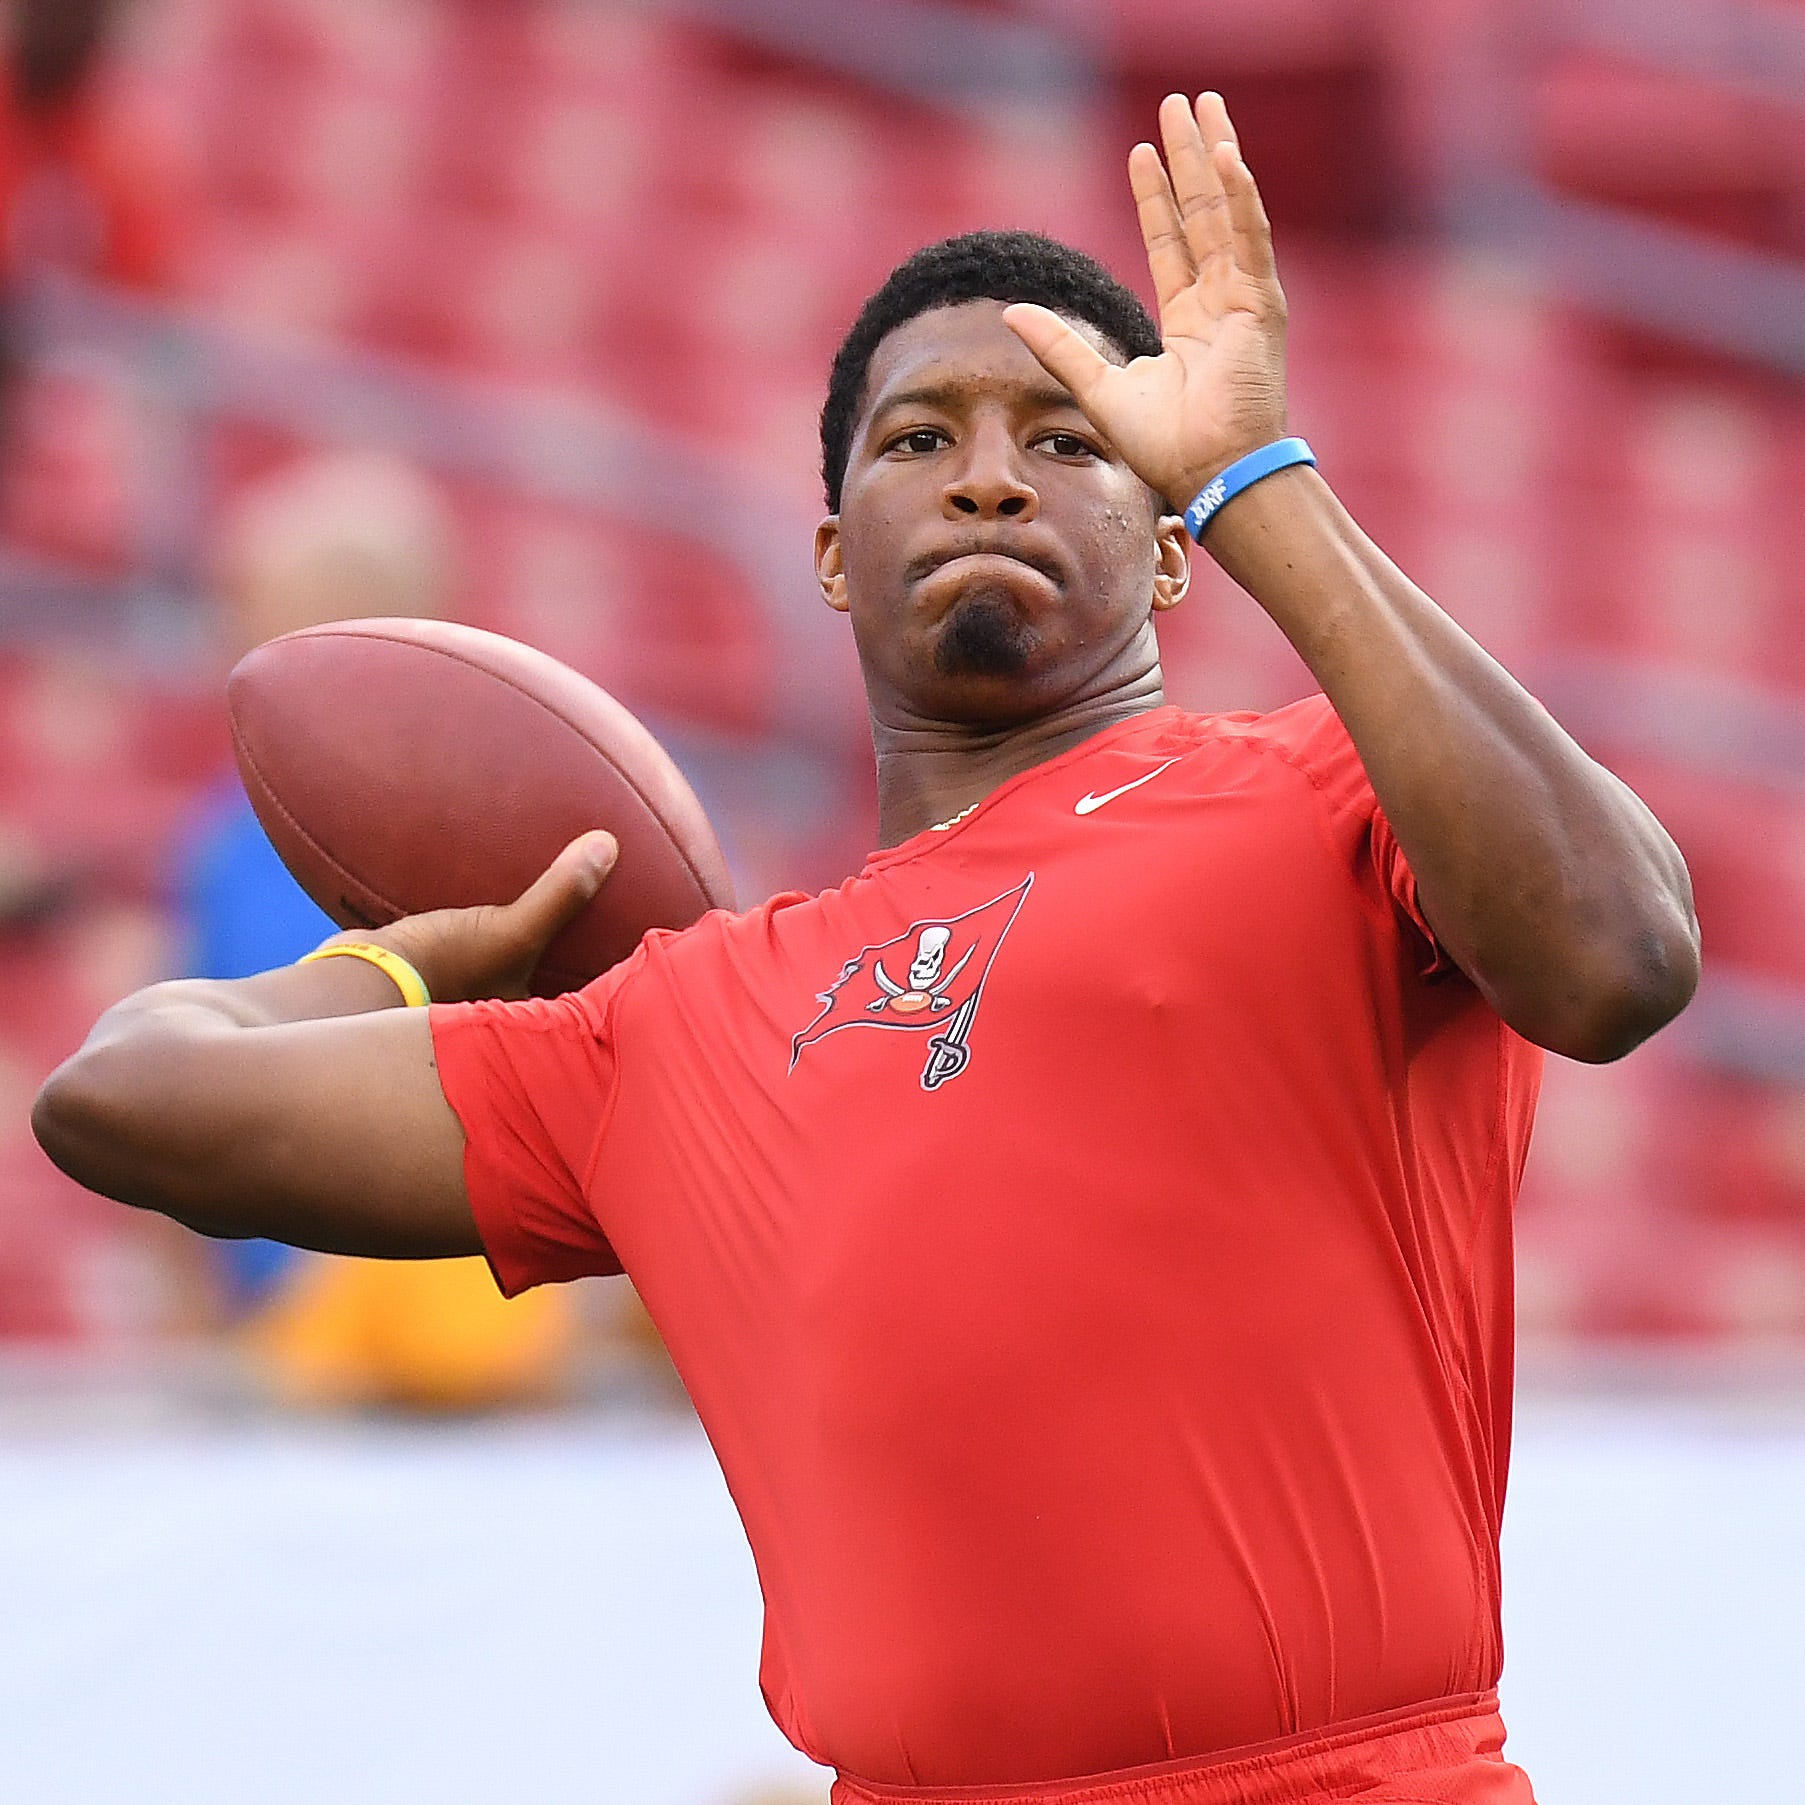 It might be difficult for Jameis Winston to reclaim the starting QB spot in Tampa.